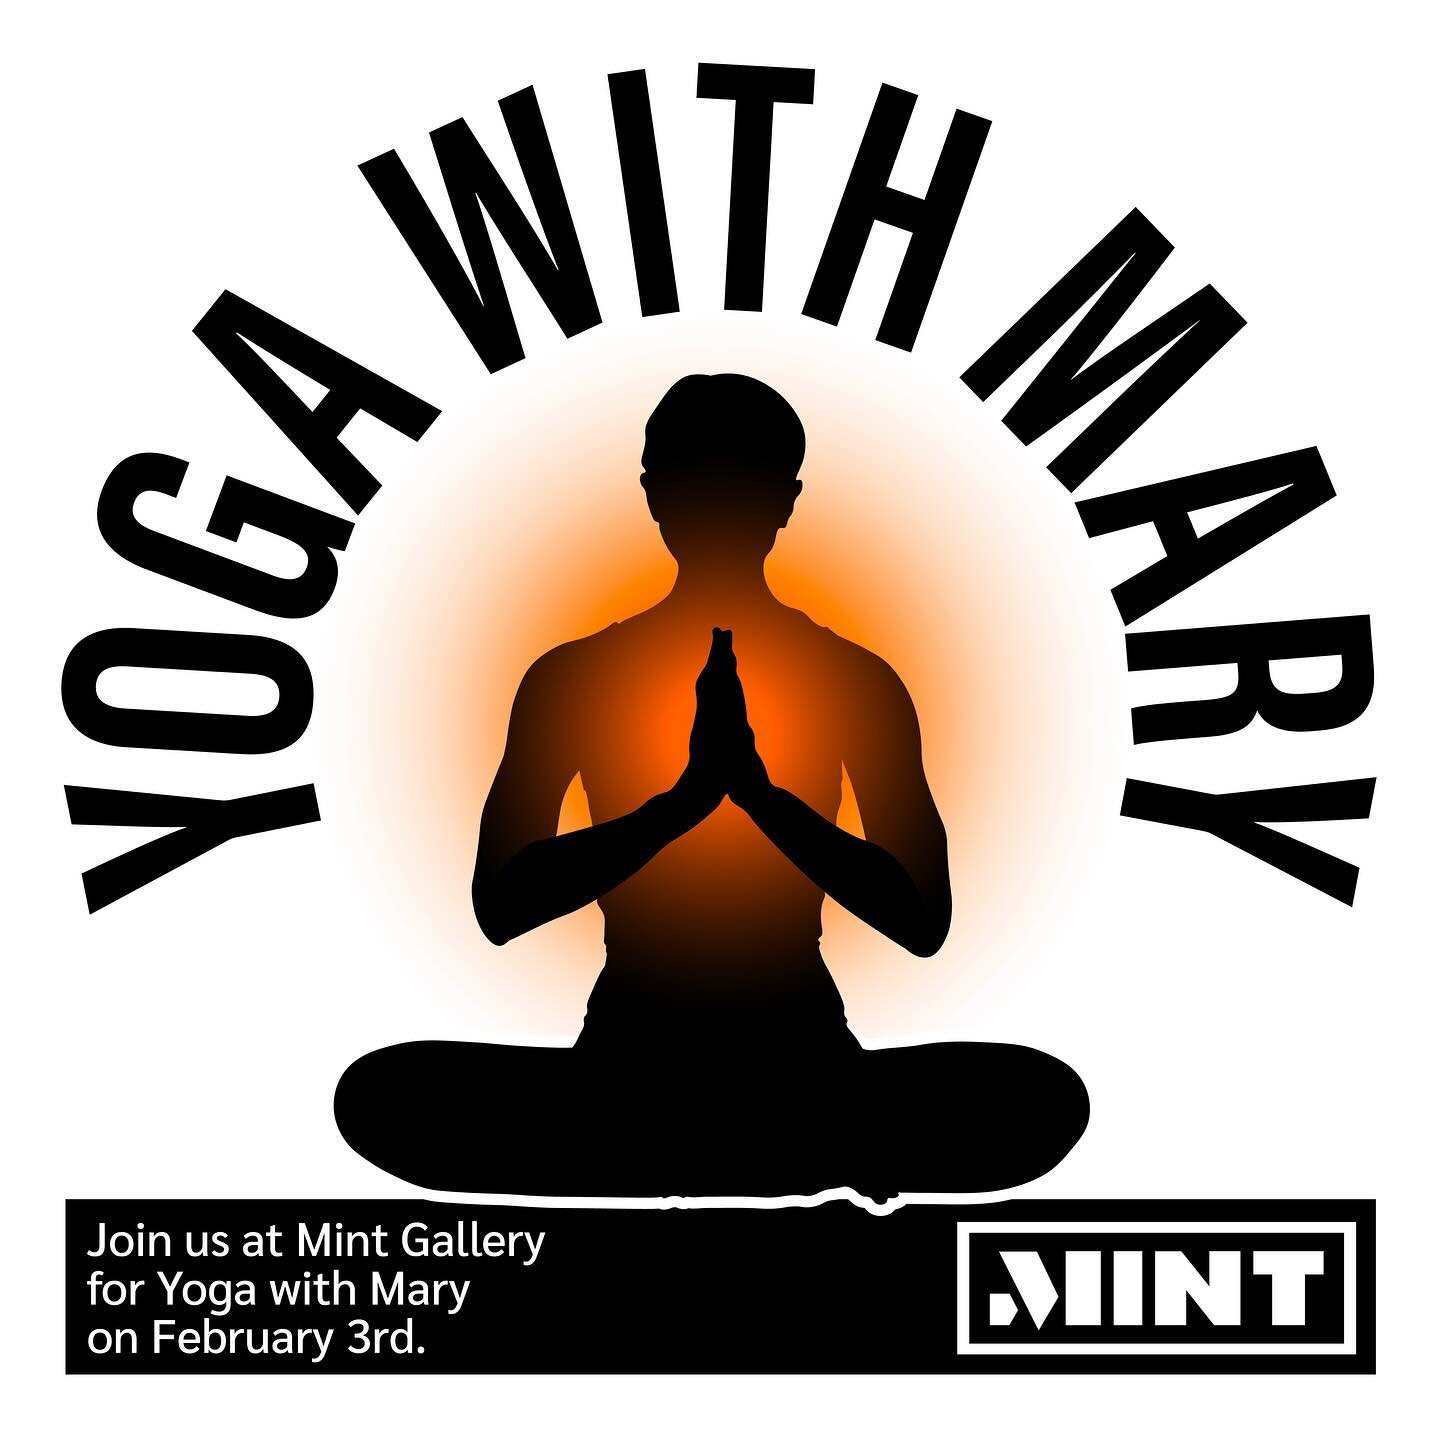 🌟 Rise, shine, and set your intentions on the mat with @mary2thegame and @vinylandvinyasa 🧘🏽&zwj;♀️ Join us on February 3rd at 10:45 AM for a rejuvenating yoga session!

Let's welcome the new year together with open hearts and focused minds. Allow